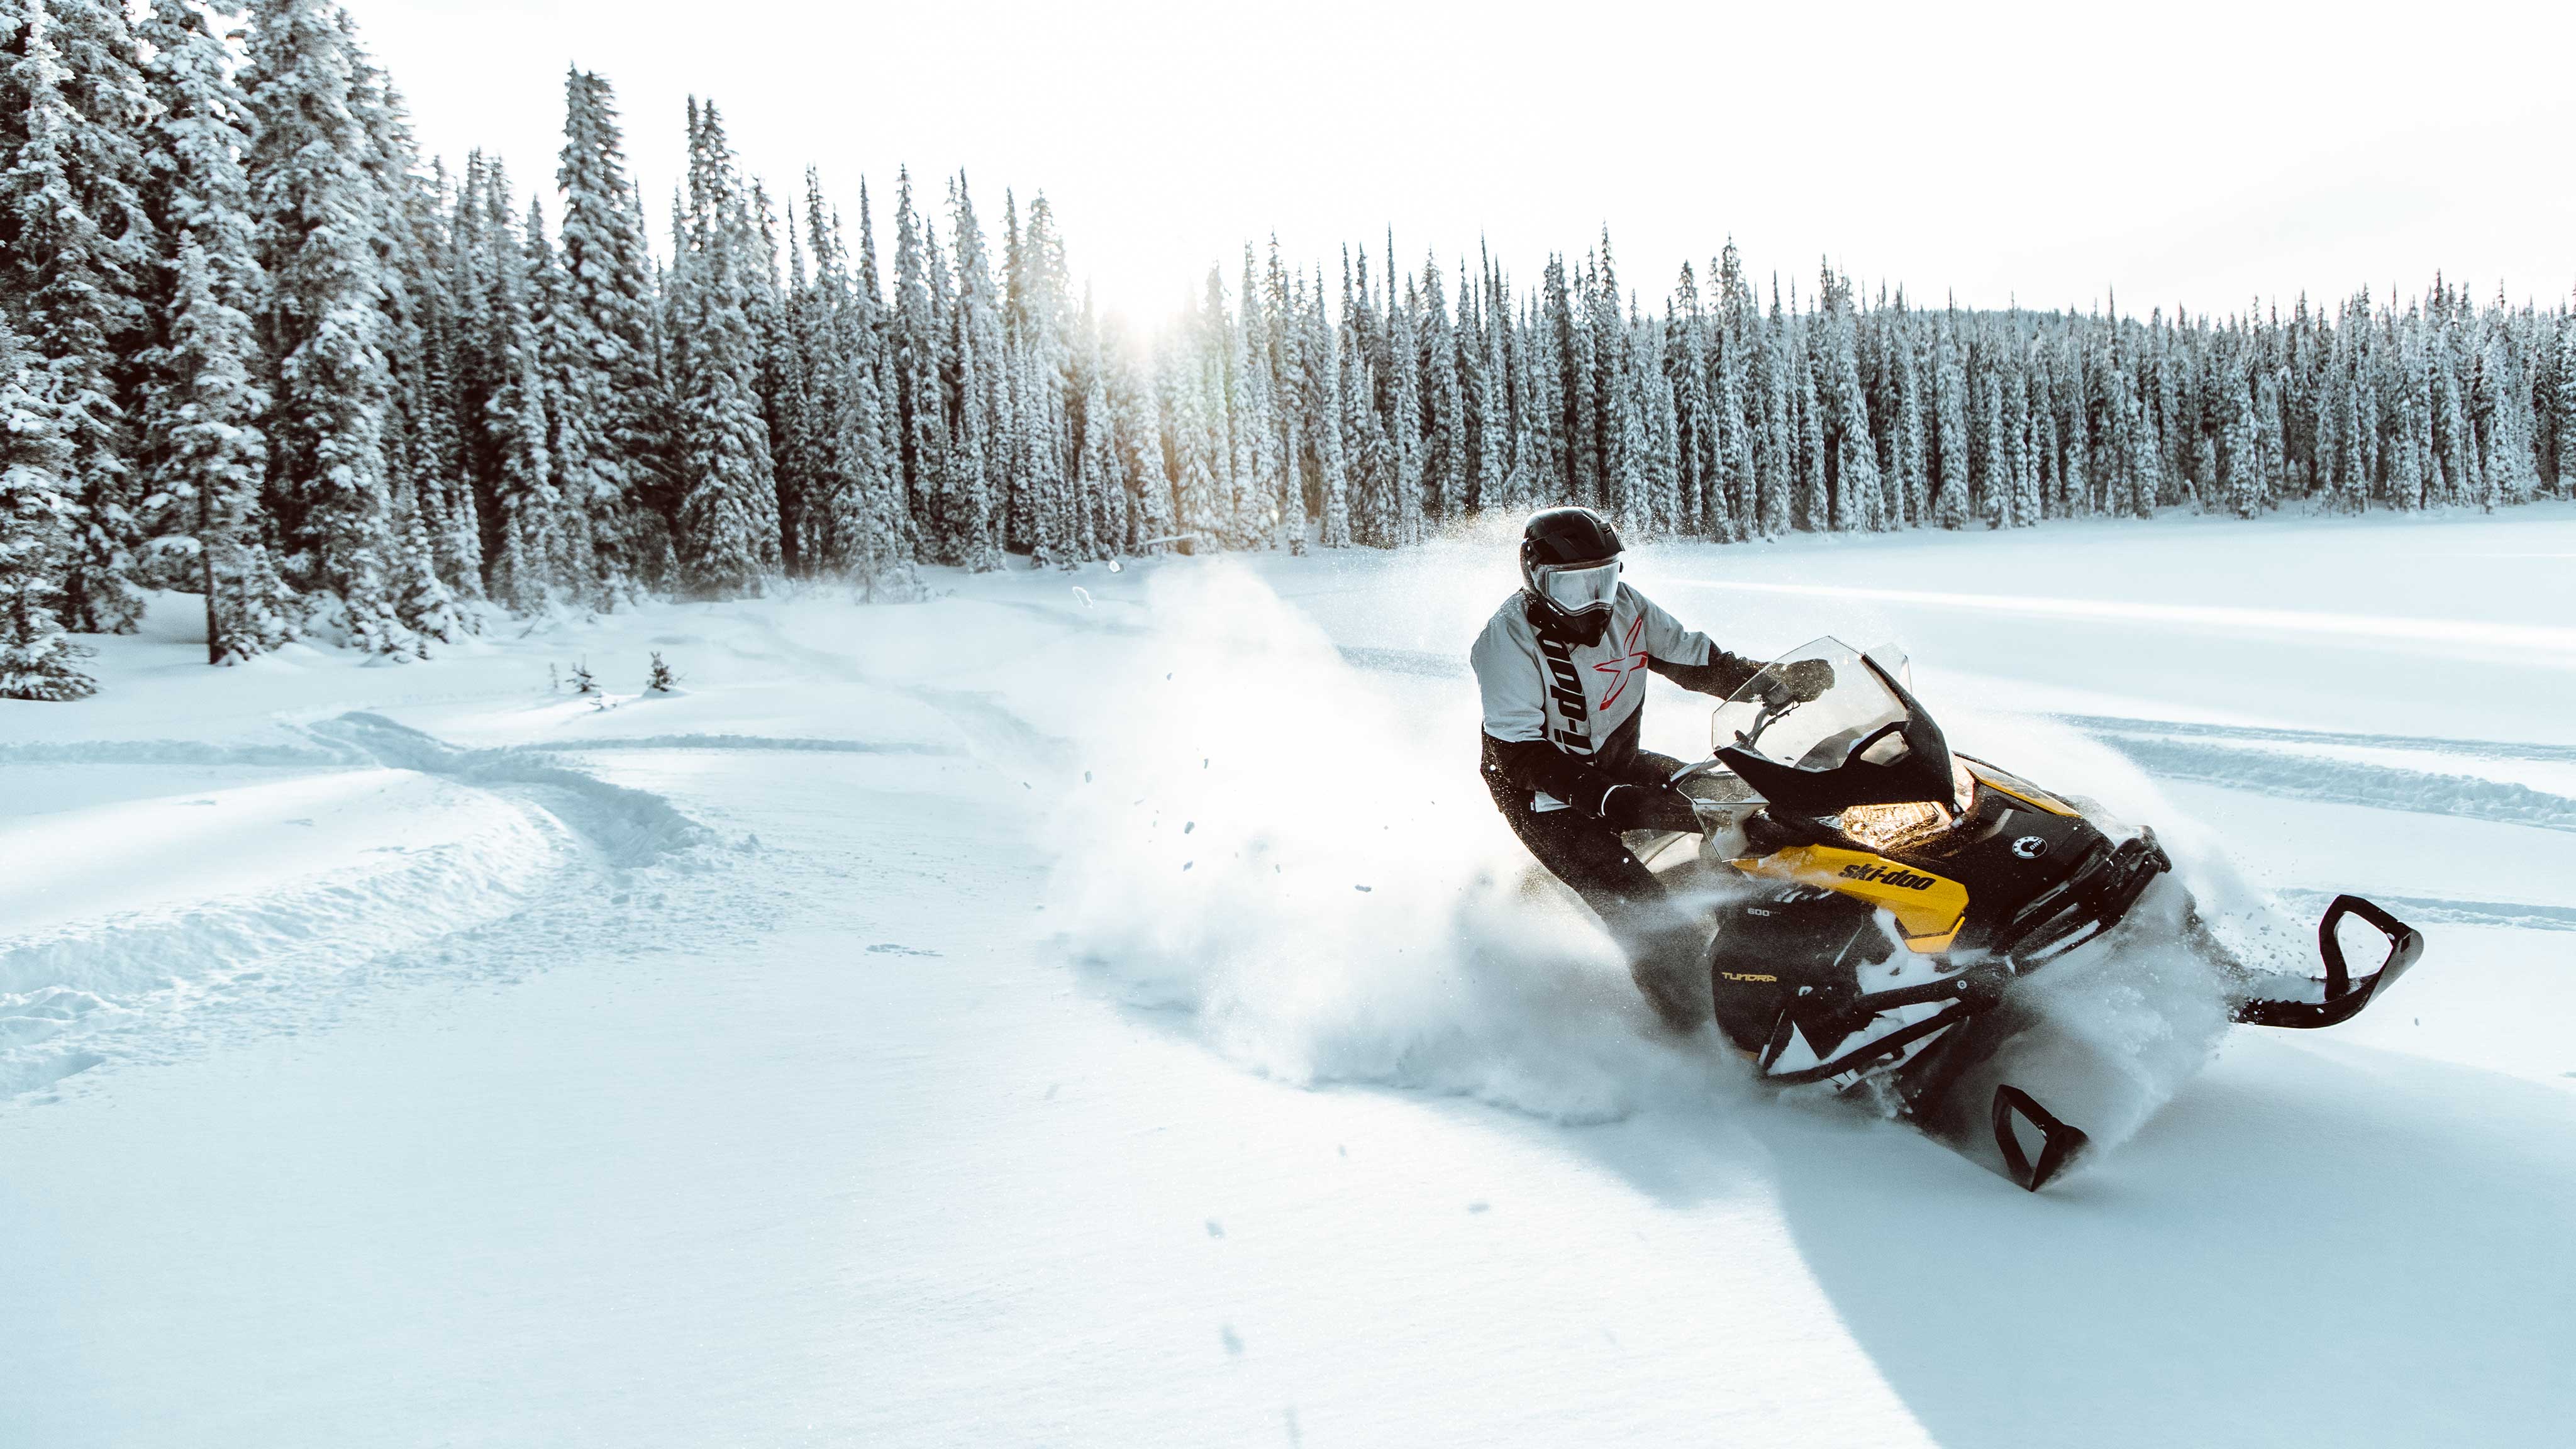 2022 SkiDoo Tundra for sale Offtrail snowmobile BRP World